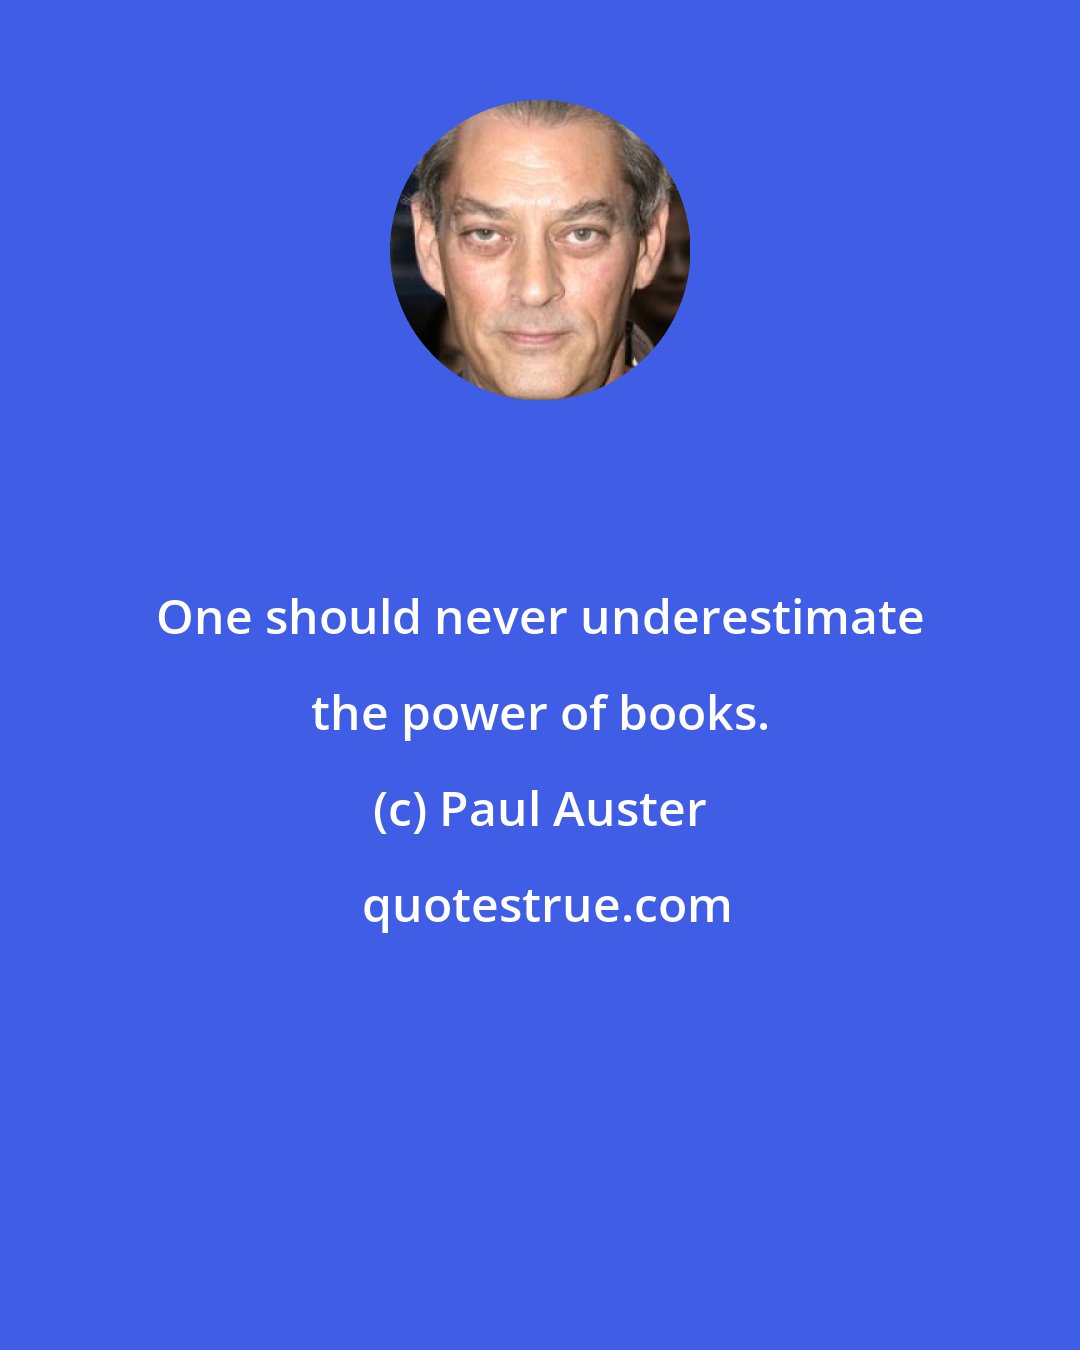 Paul Auster: One should never underestimate the power of books.